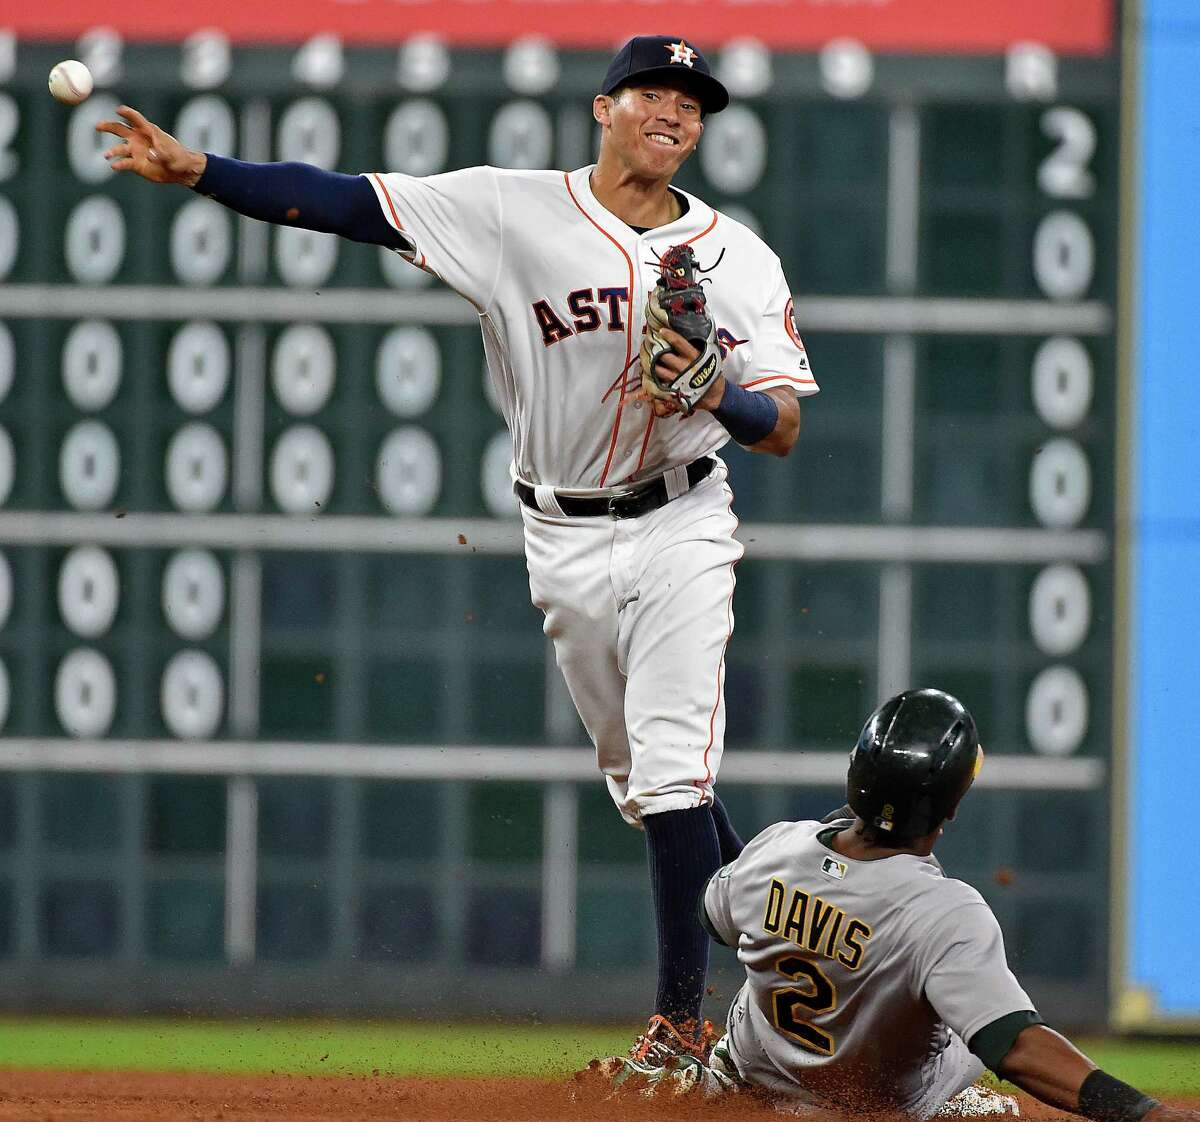 Houston Astros shortstop Carlos Correa, left, turns a double play over Oakland Athletics' Khris Davis to end the sixth inning of a baseball game, Monday, Aug. 29, 2016, in Houston. (AP Photo/Eric Christian Smith)